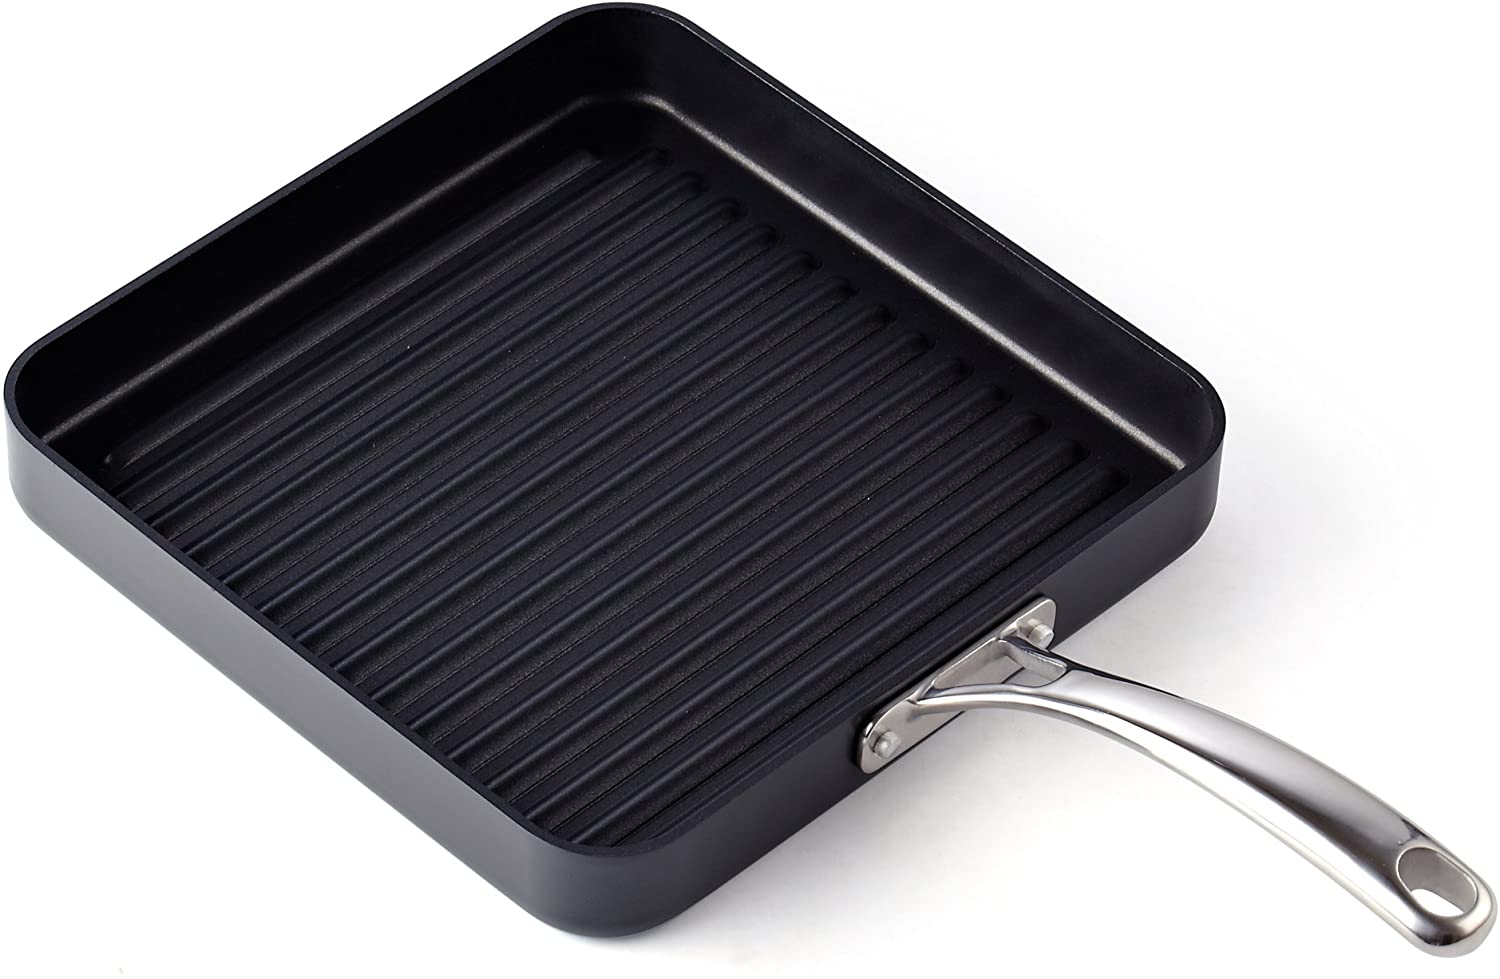 Cooks Standard Nonstick Square Griddle Pan 11 x 11-Inch, Hard Anodized  Cookware Griddle Pan, Black